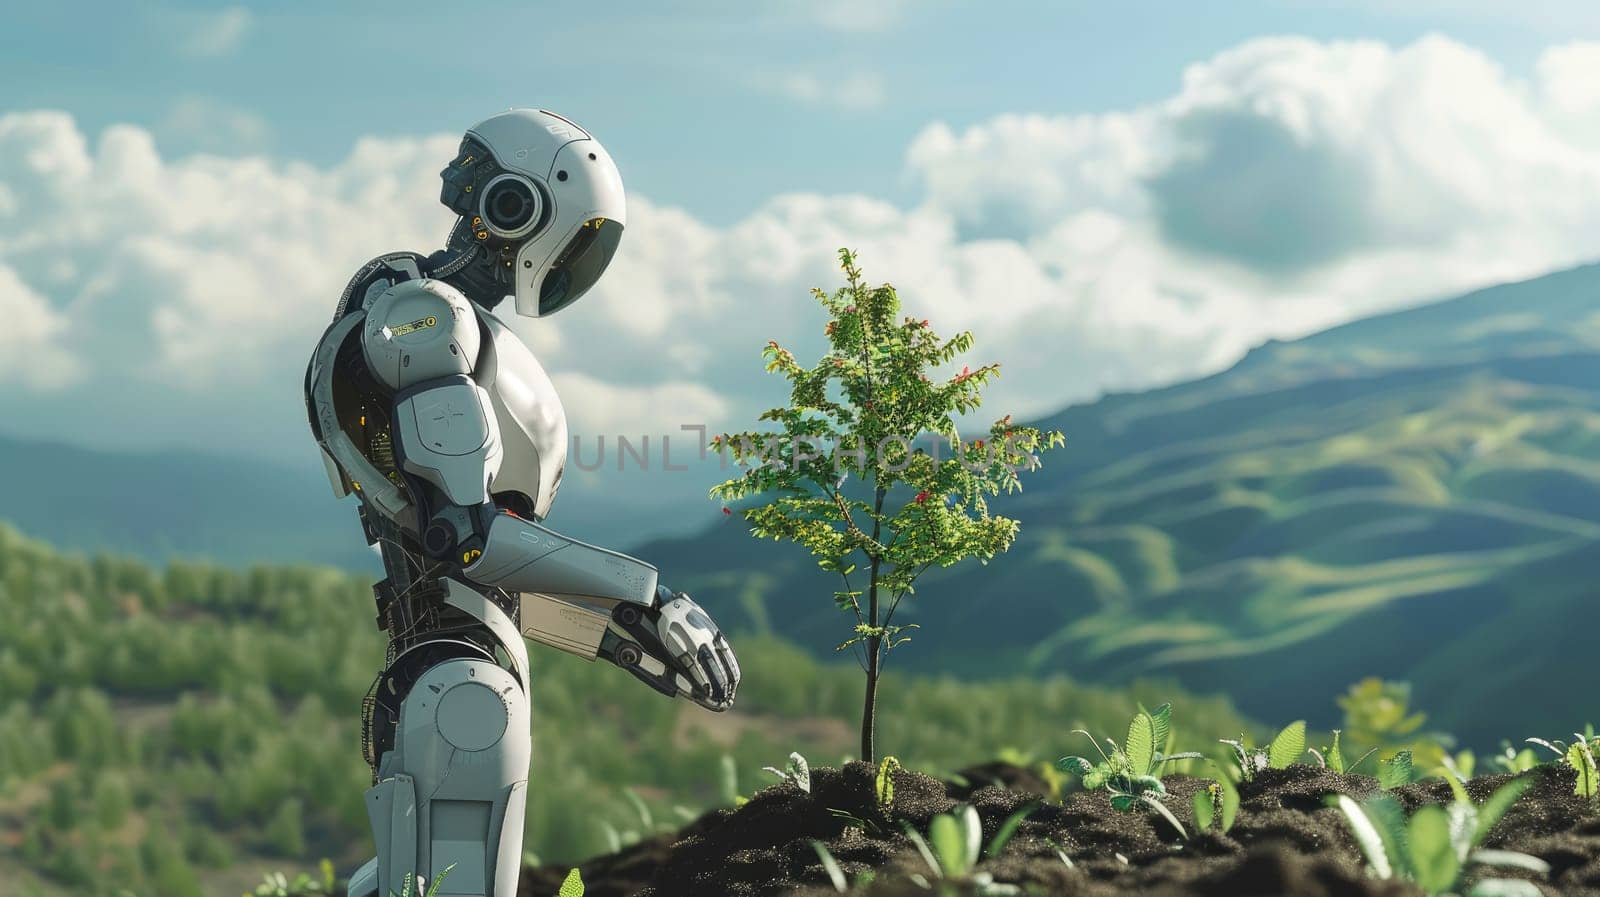 A robot planting a tree in a reforestation effort, Surrounded by a natural landscape, Futuristic preserving and enhancing the environment.